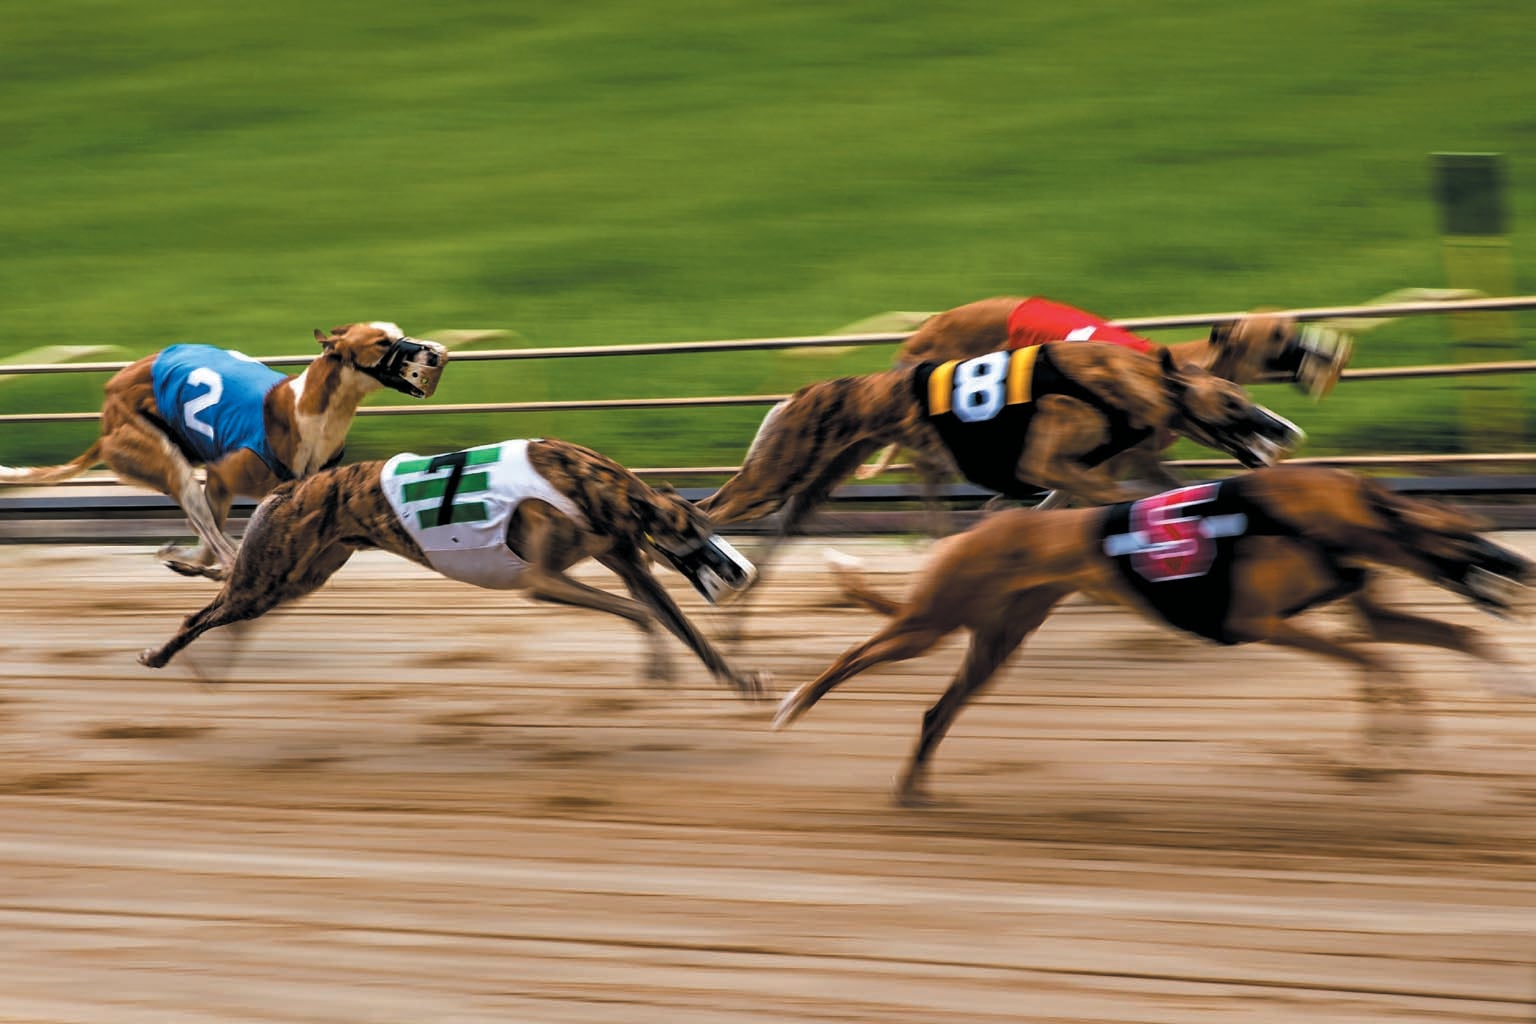 Five Greyhound dogs shown in motion racing on a track.